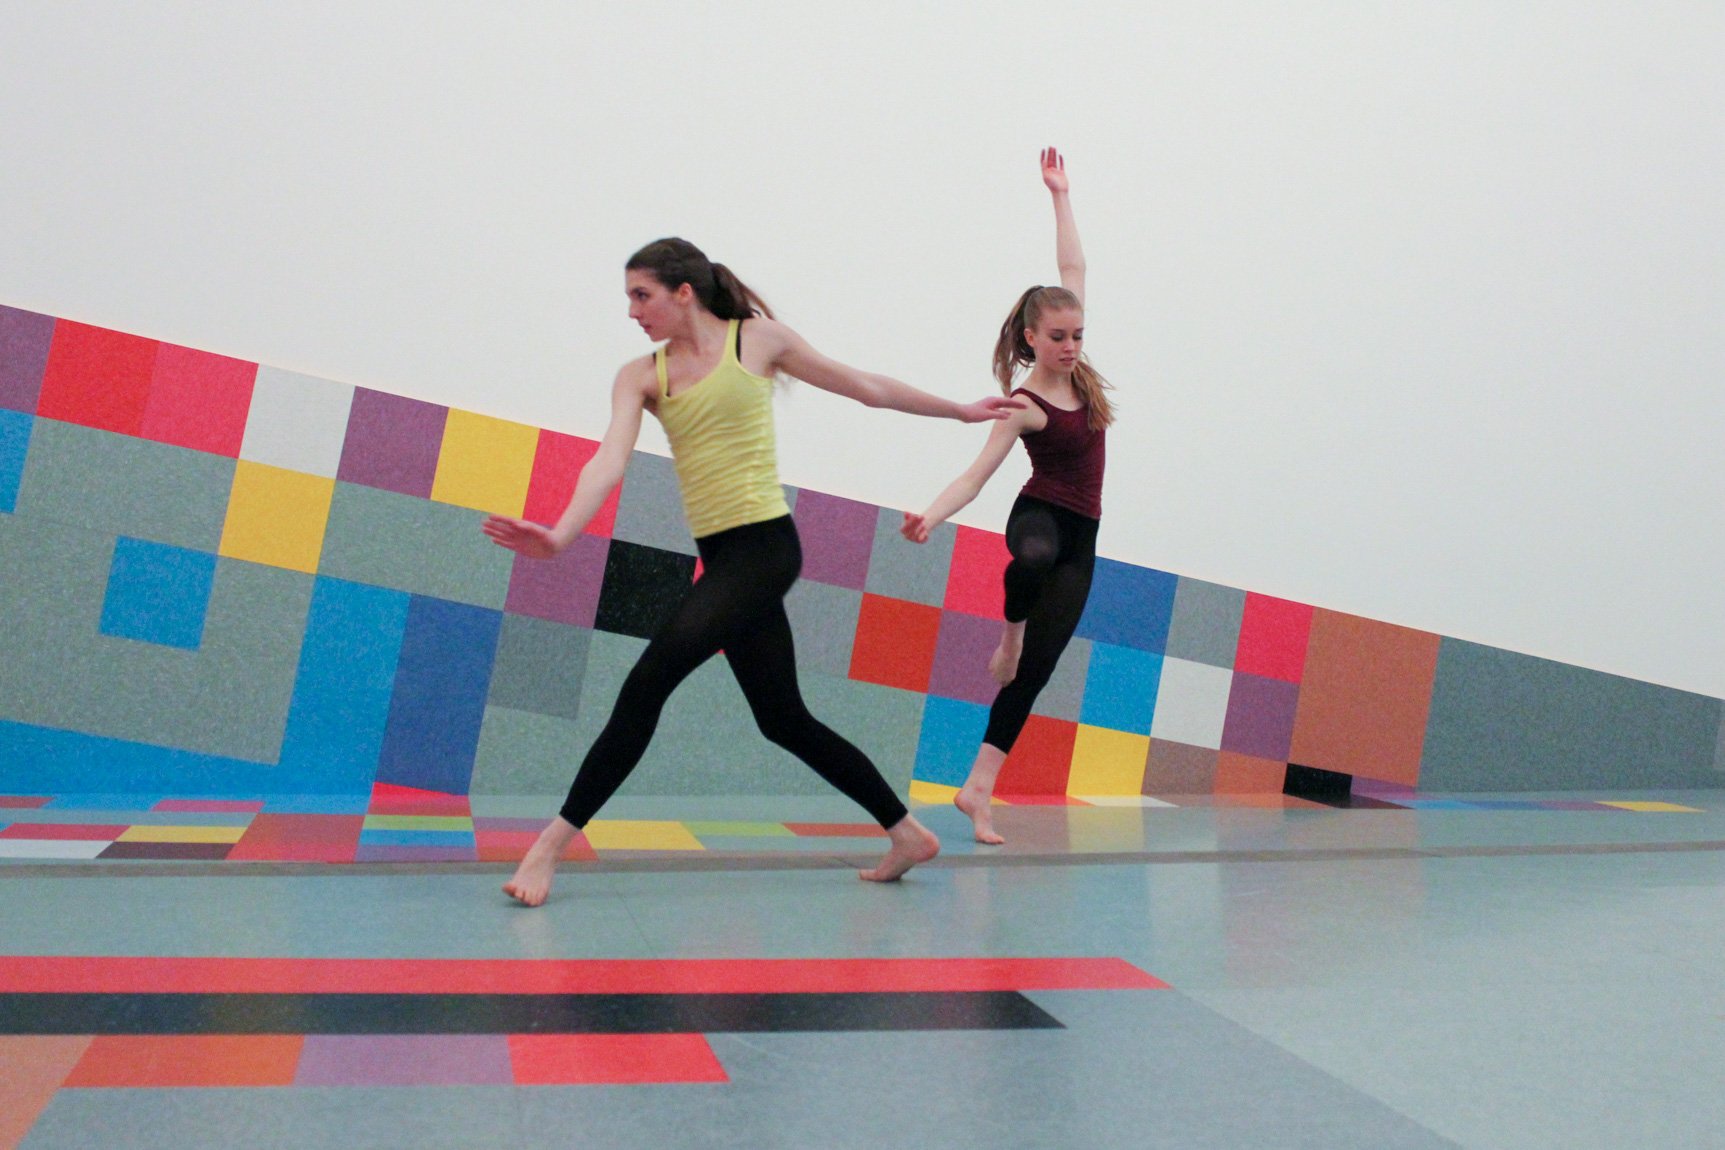 COCA dancers perform with David Scanavino's "Candy Crush" installation.